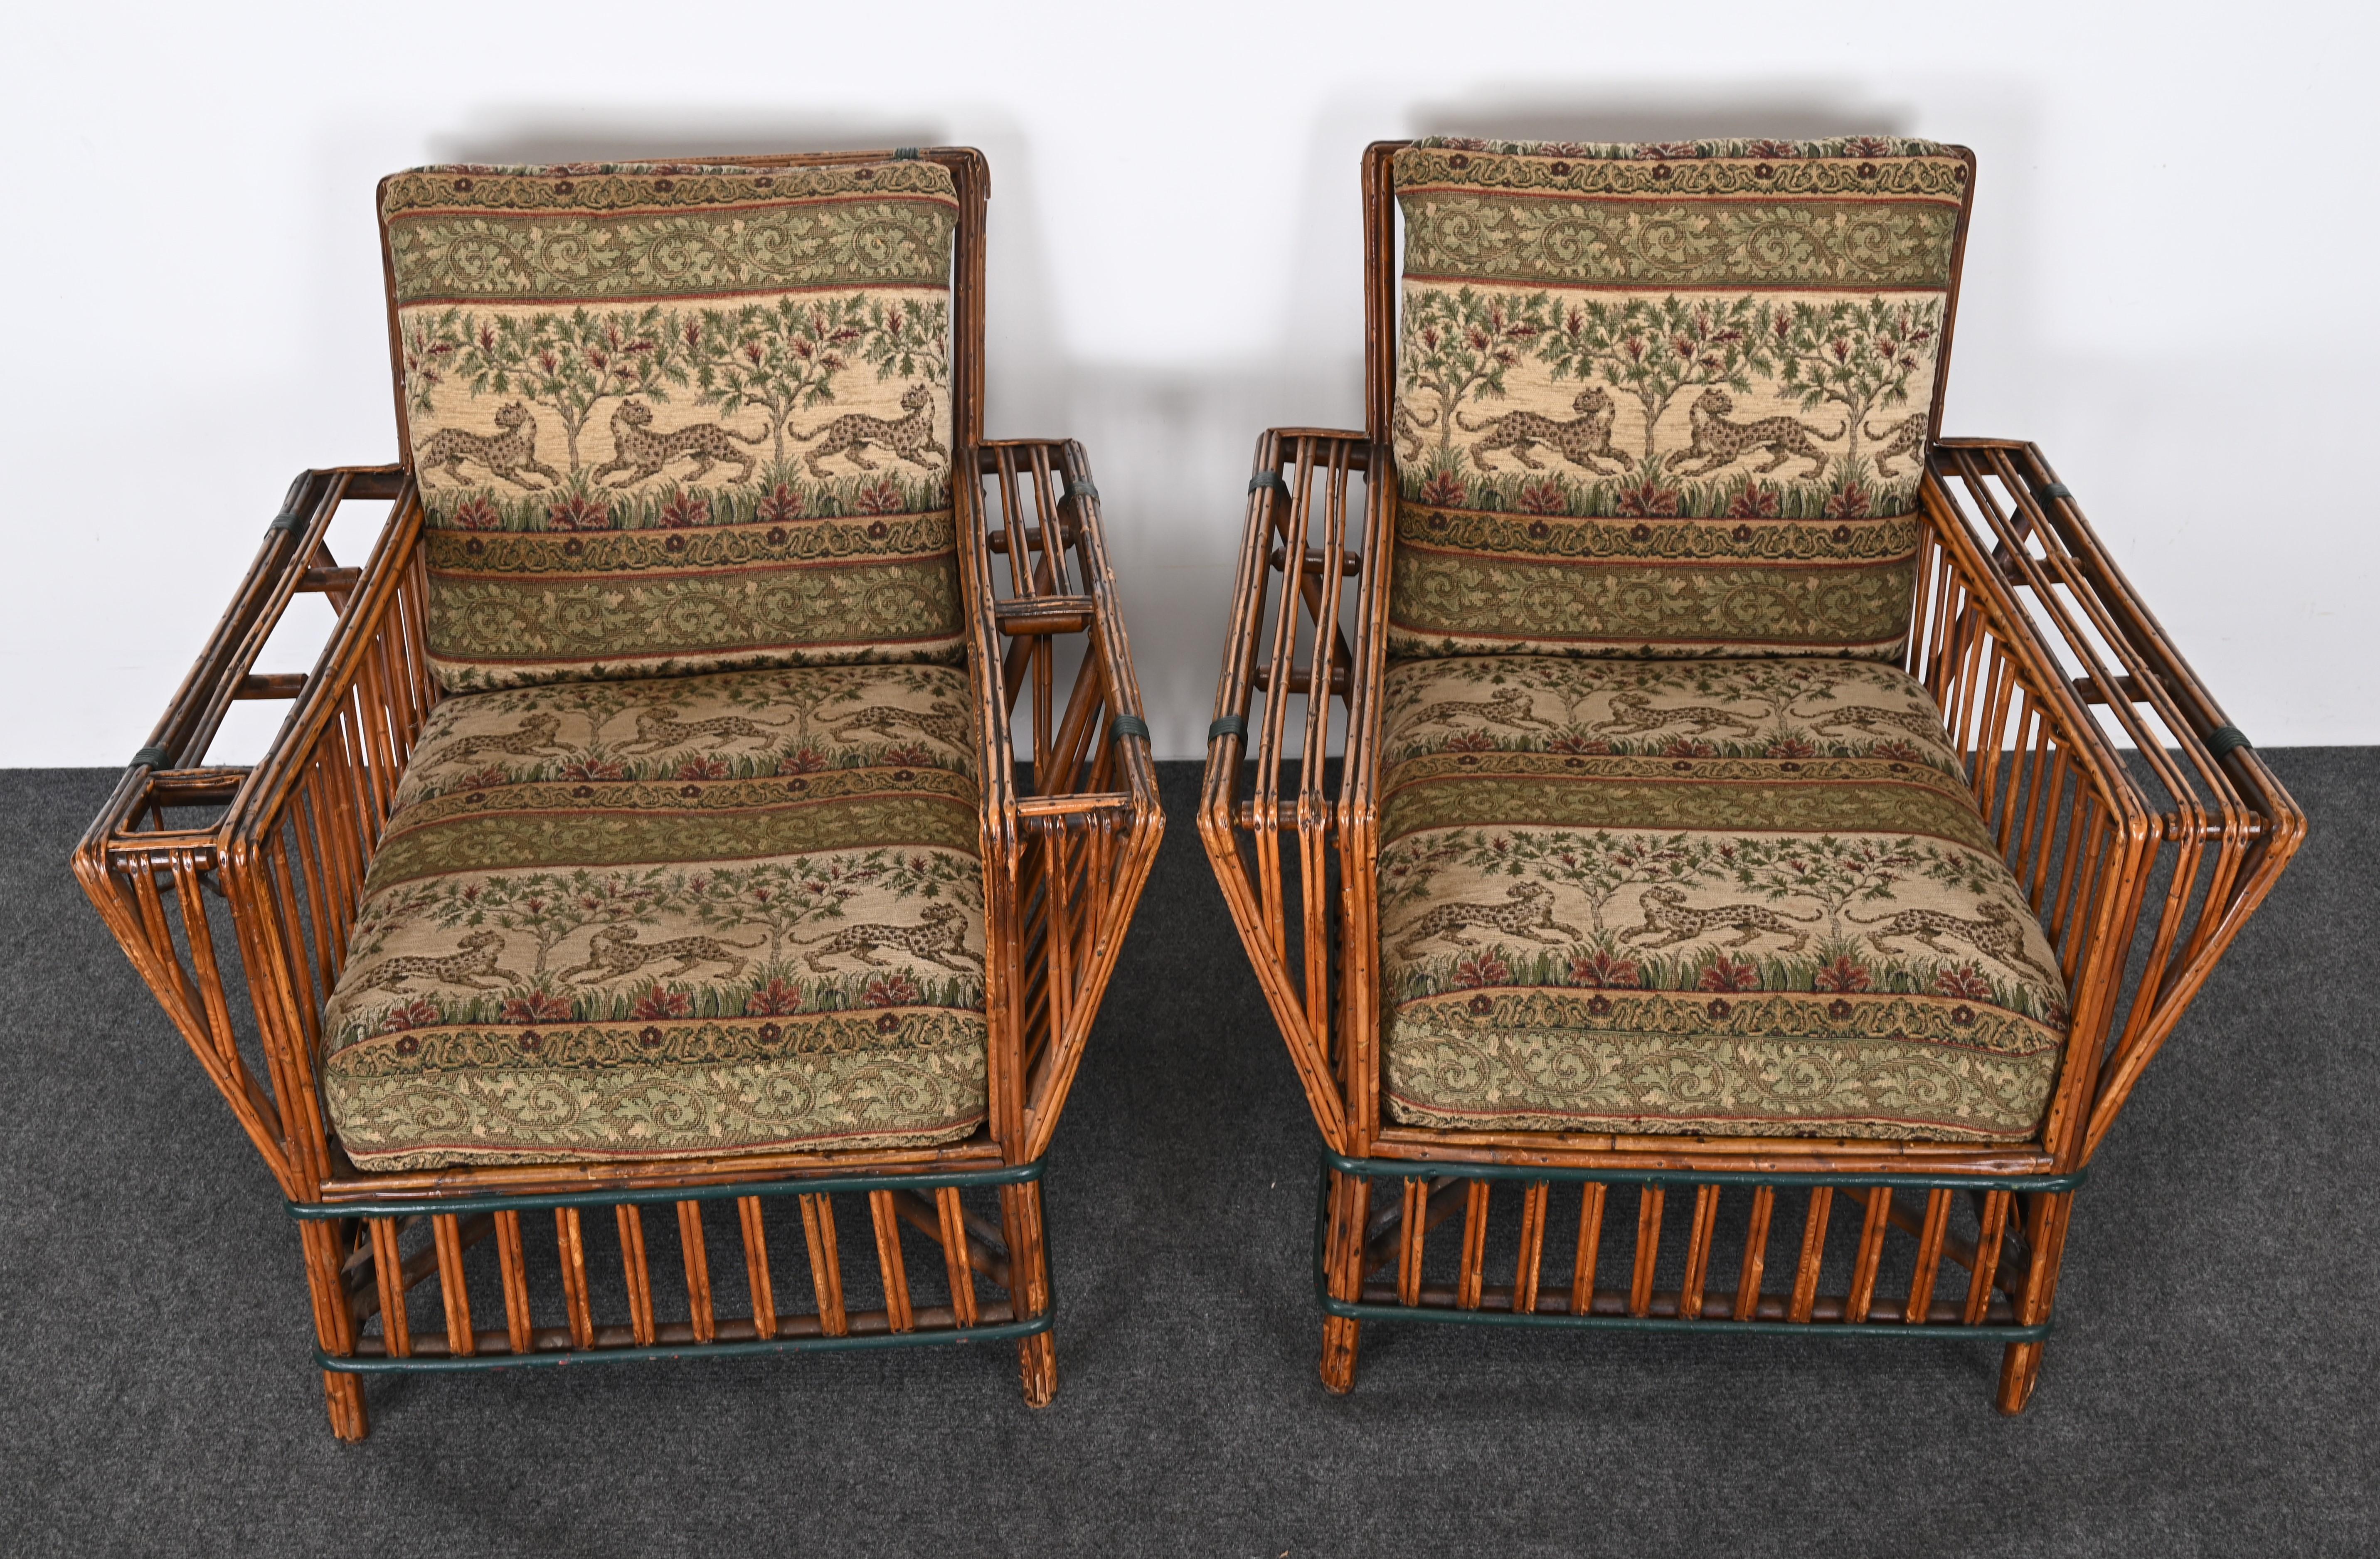 Fabric Art Deco Split Ypsilanti Stick Reed Wicker or Sofa with Pair Arm Chairs c. 1930s For Sale